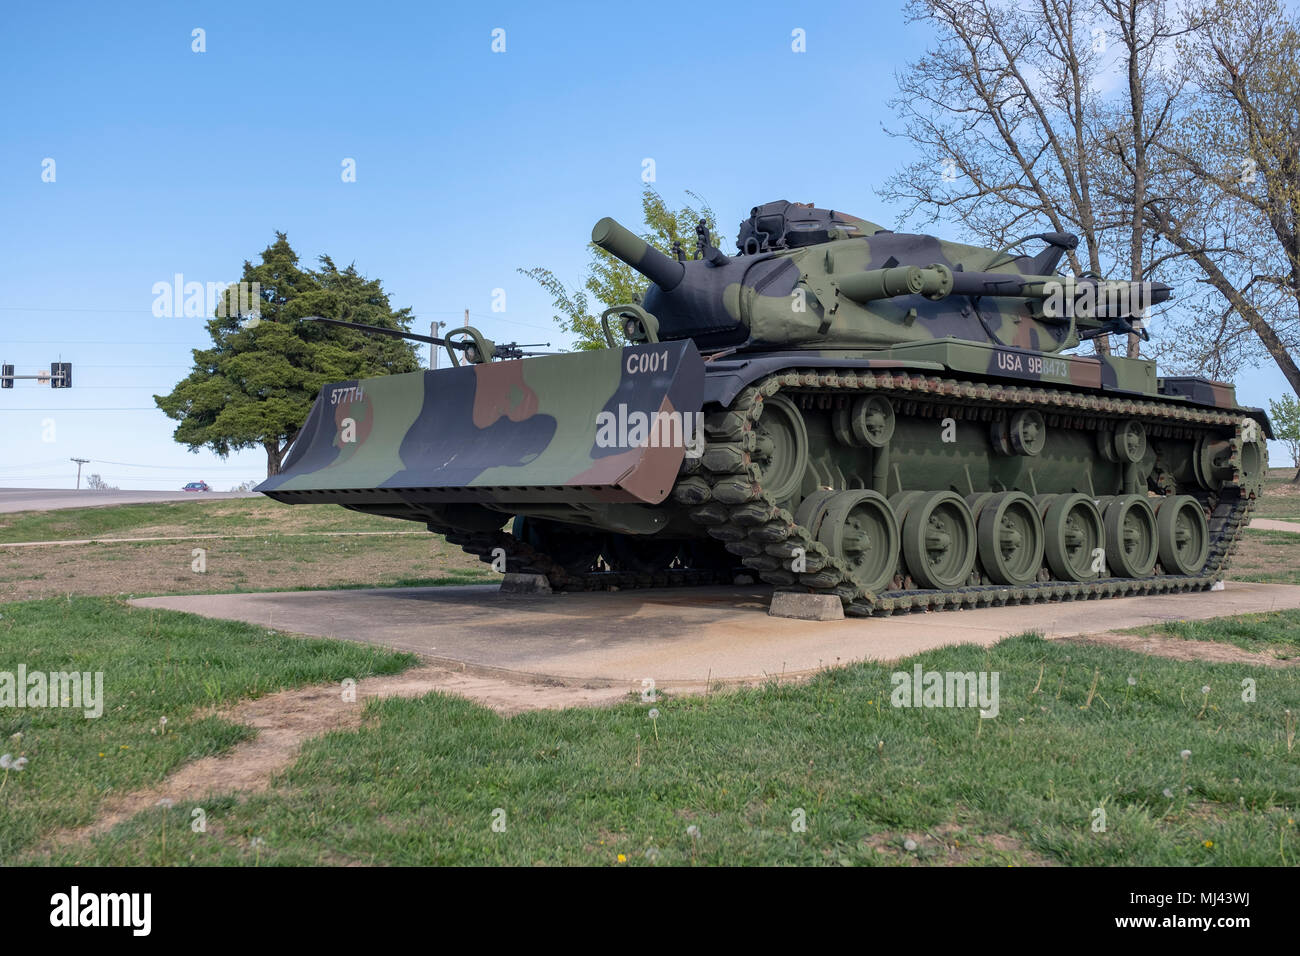 Military Vehicle Dozer. An outdoor military vehicle complex featuring vehicles used throughout military history eras. Stock Photo